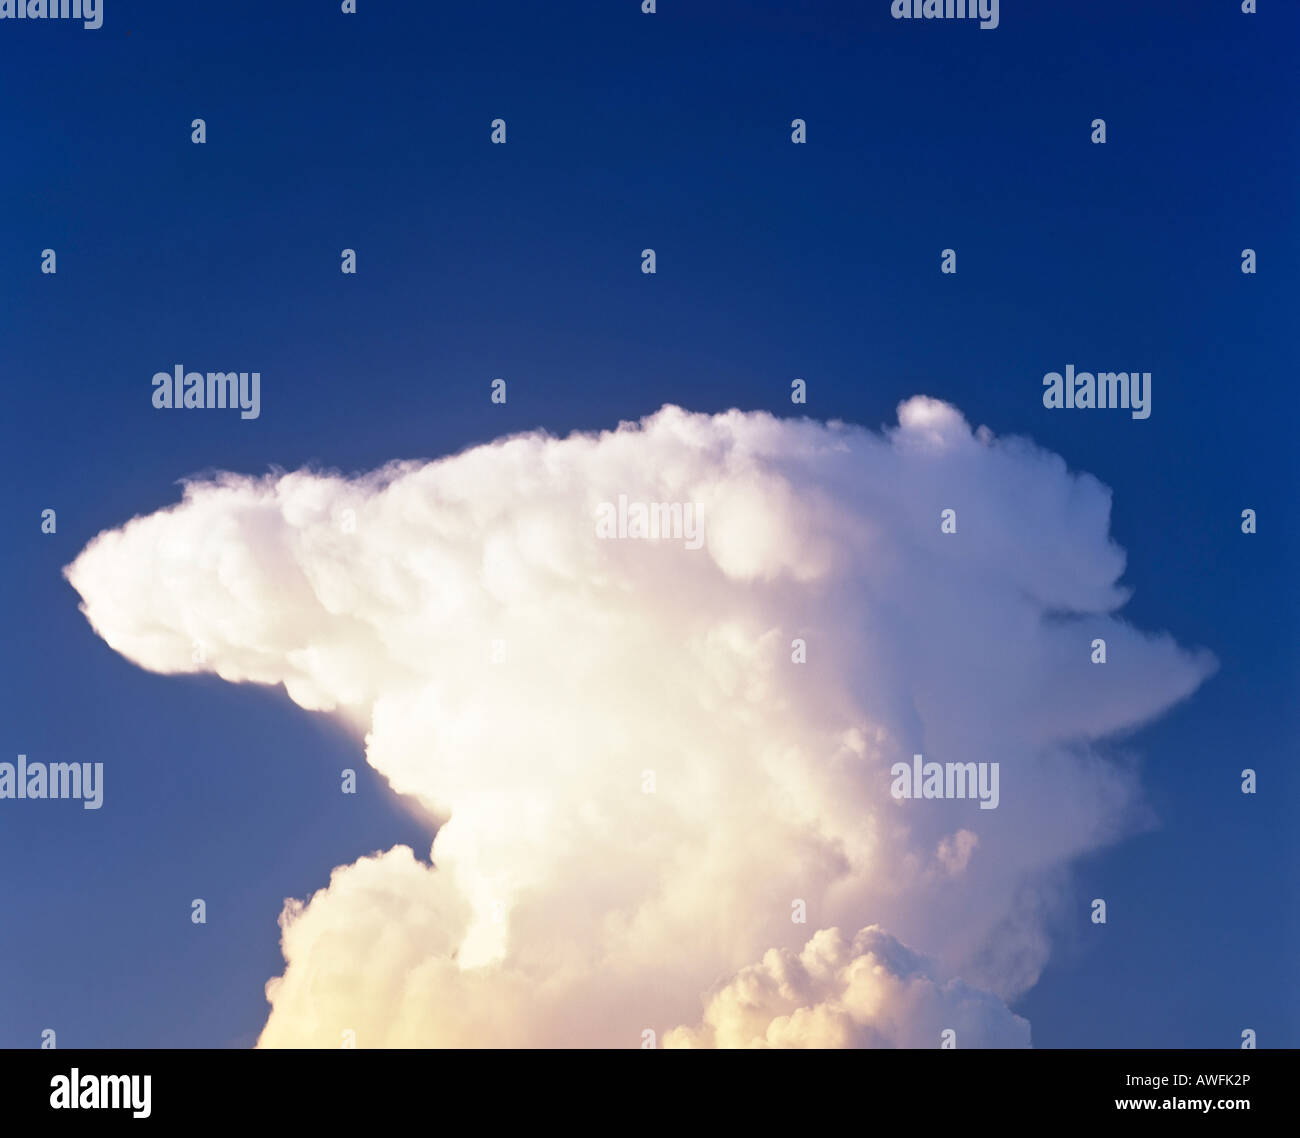 Cumulonimbus thunderclouds in a blue sky, approaching thunderstorm Stock Photo